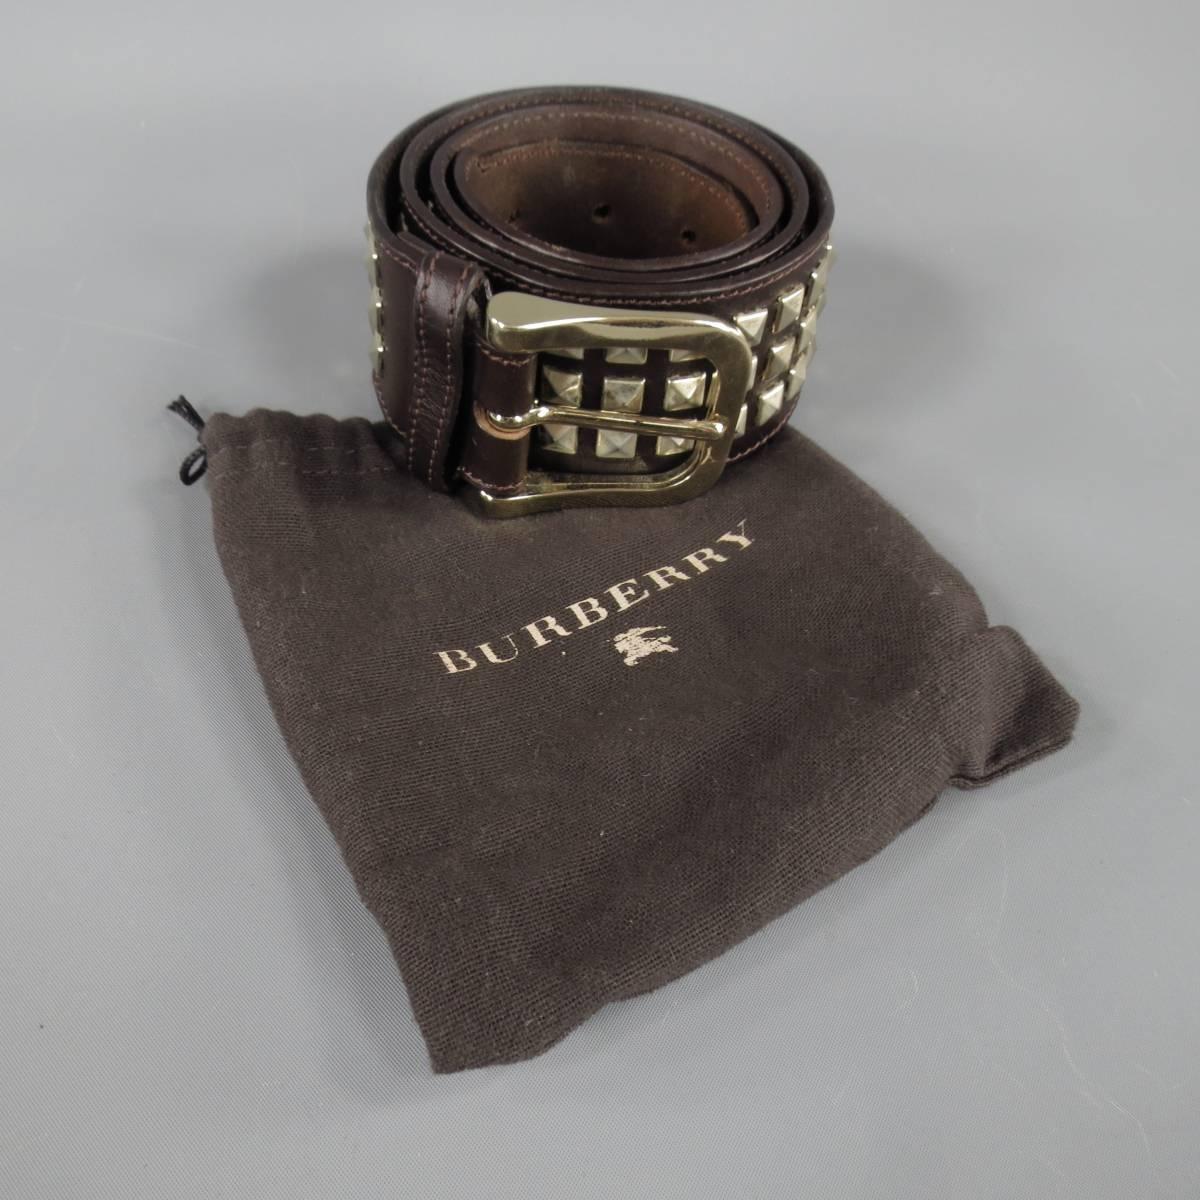 BURBERRY belt is Italian leather and features chrome shine golden hardware, 3-row pyramid studs in deep brown mahogany, made in Italy.
 
Excellent Pre-Owned Condition    Marked: 36
 
Measurements:
 
Length: 40
Width: 2 in.

Item ID: 74172
